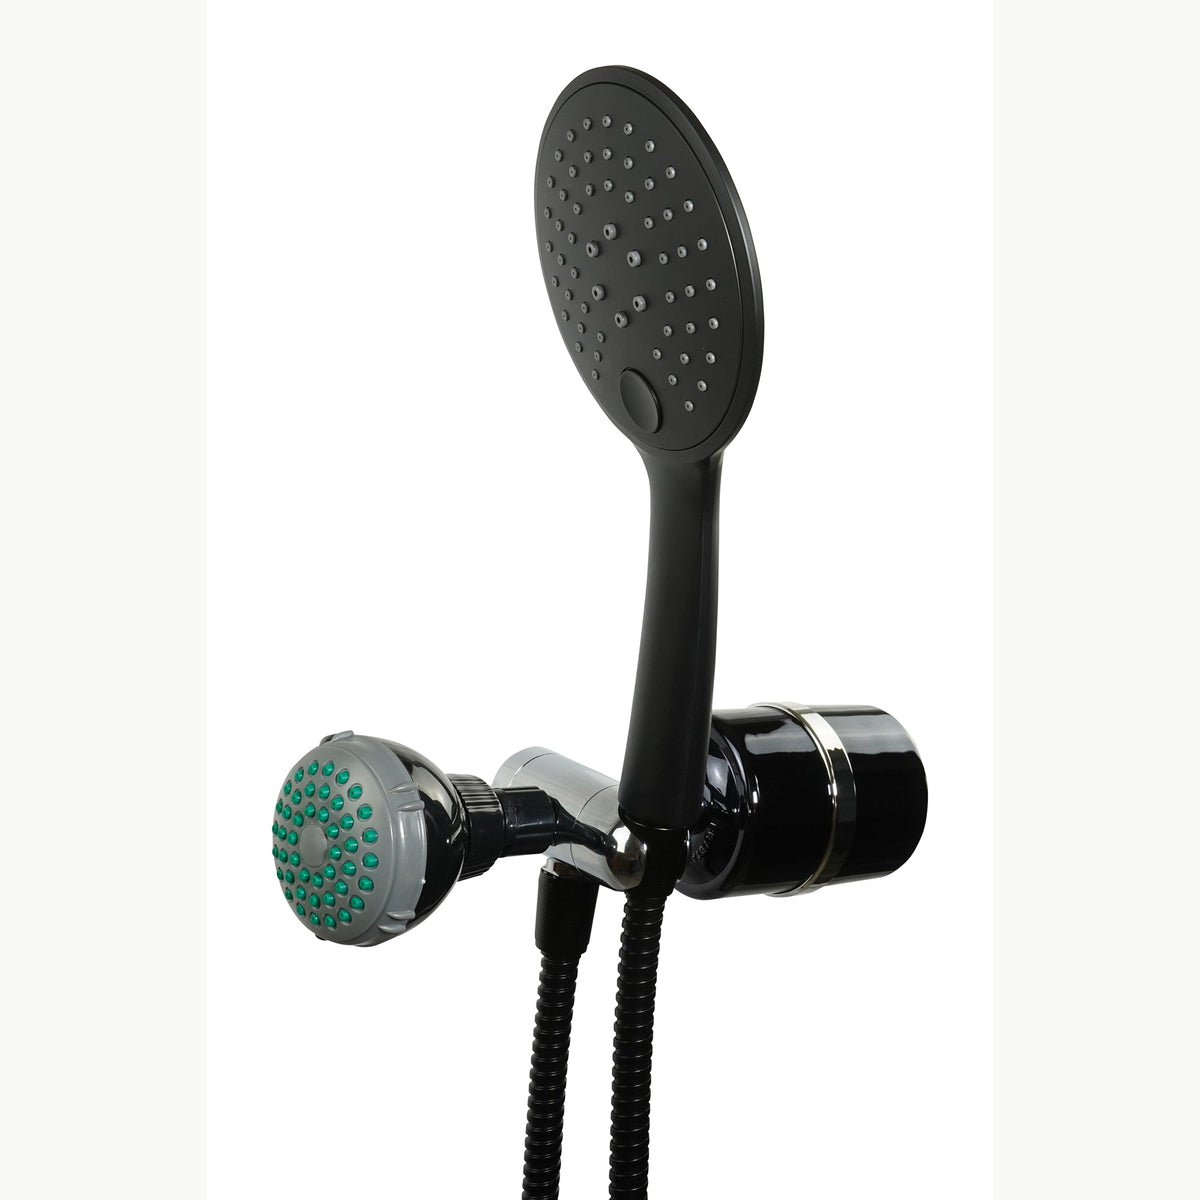 Black Handheld and Shower Head Combo Filter - Shower Bath Filters - Crystal Quest